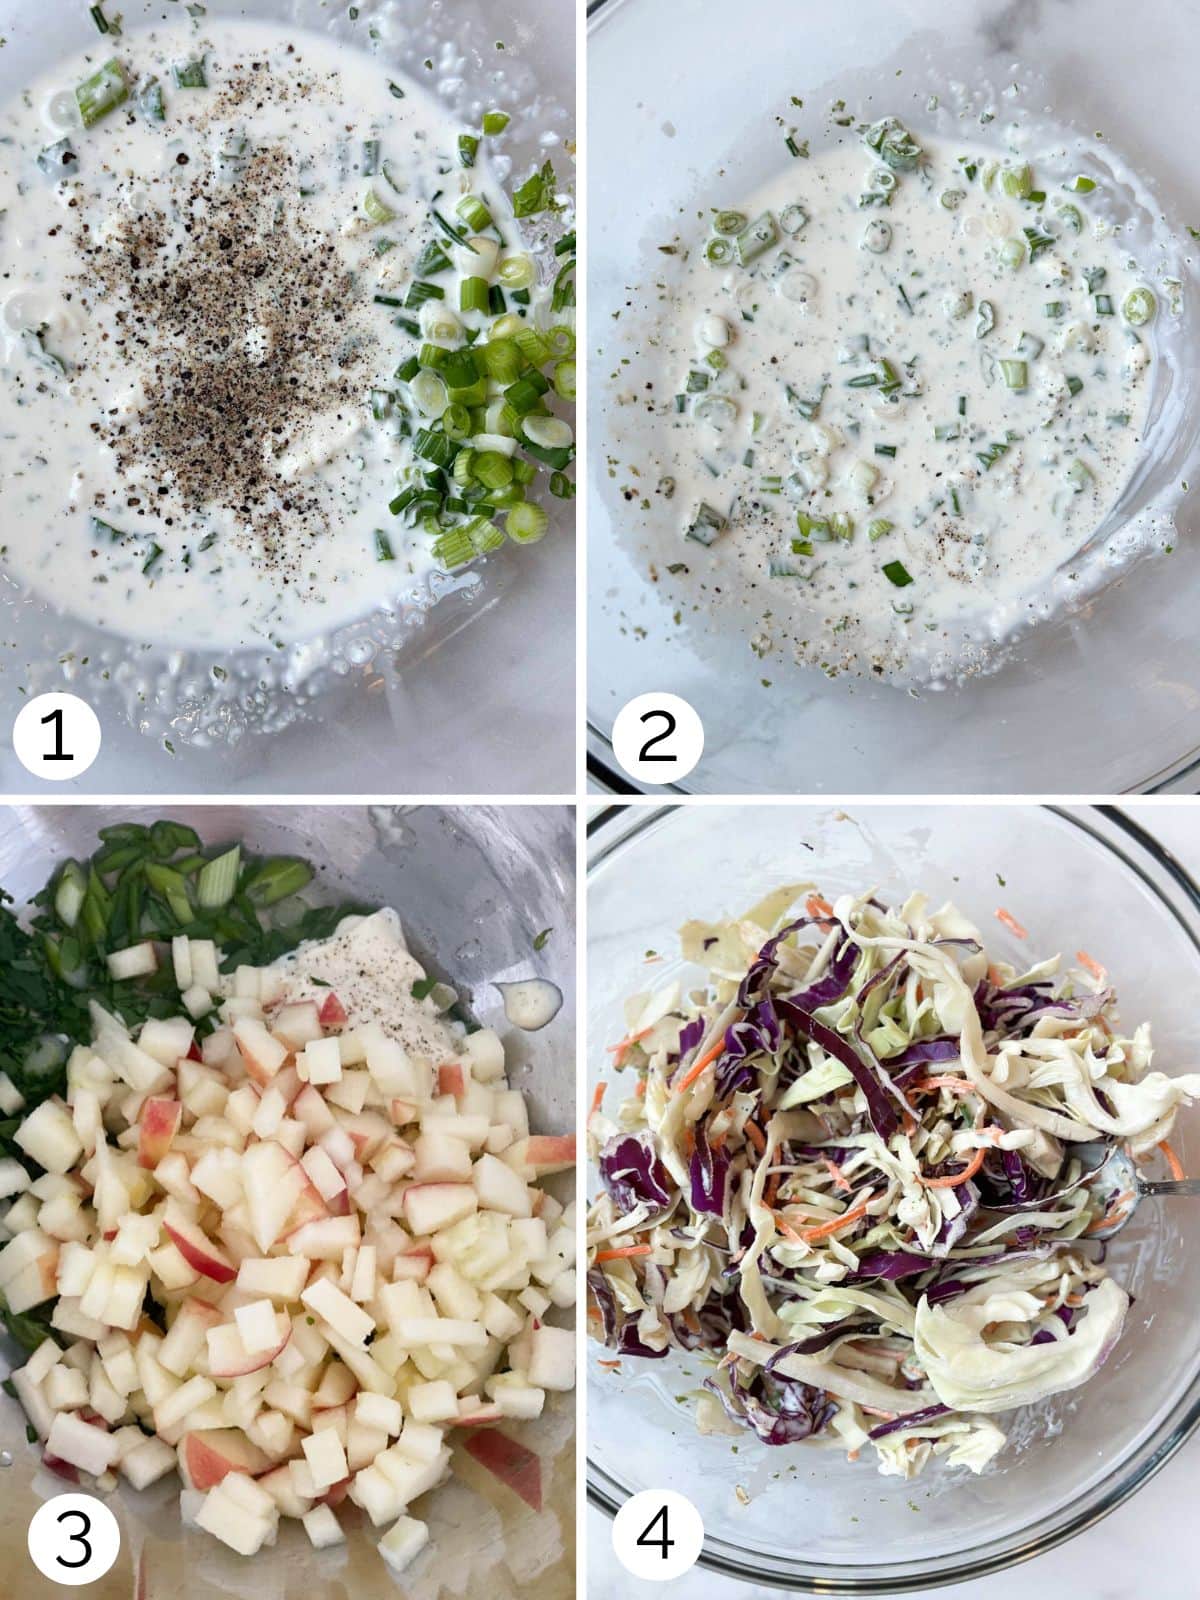 Process shots of making the dressing for coleslaw and adding apples and herbs.